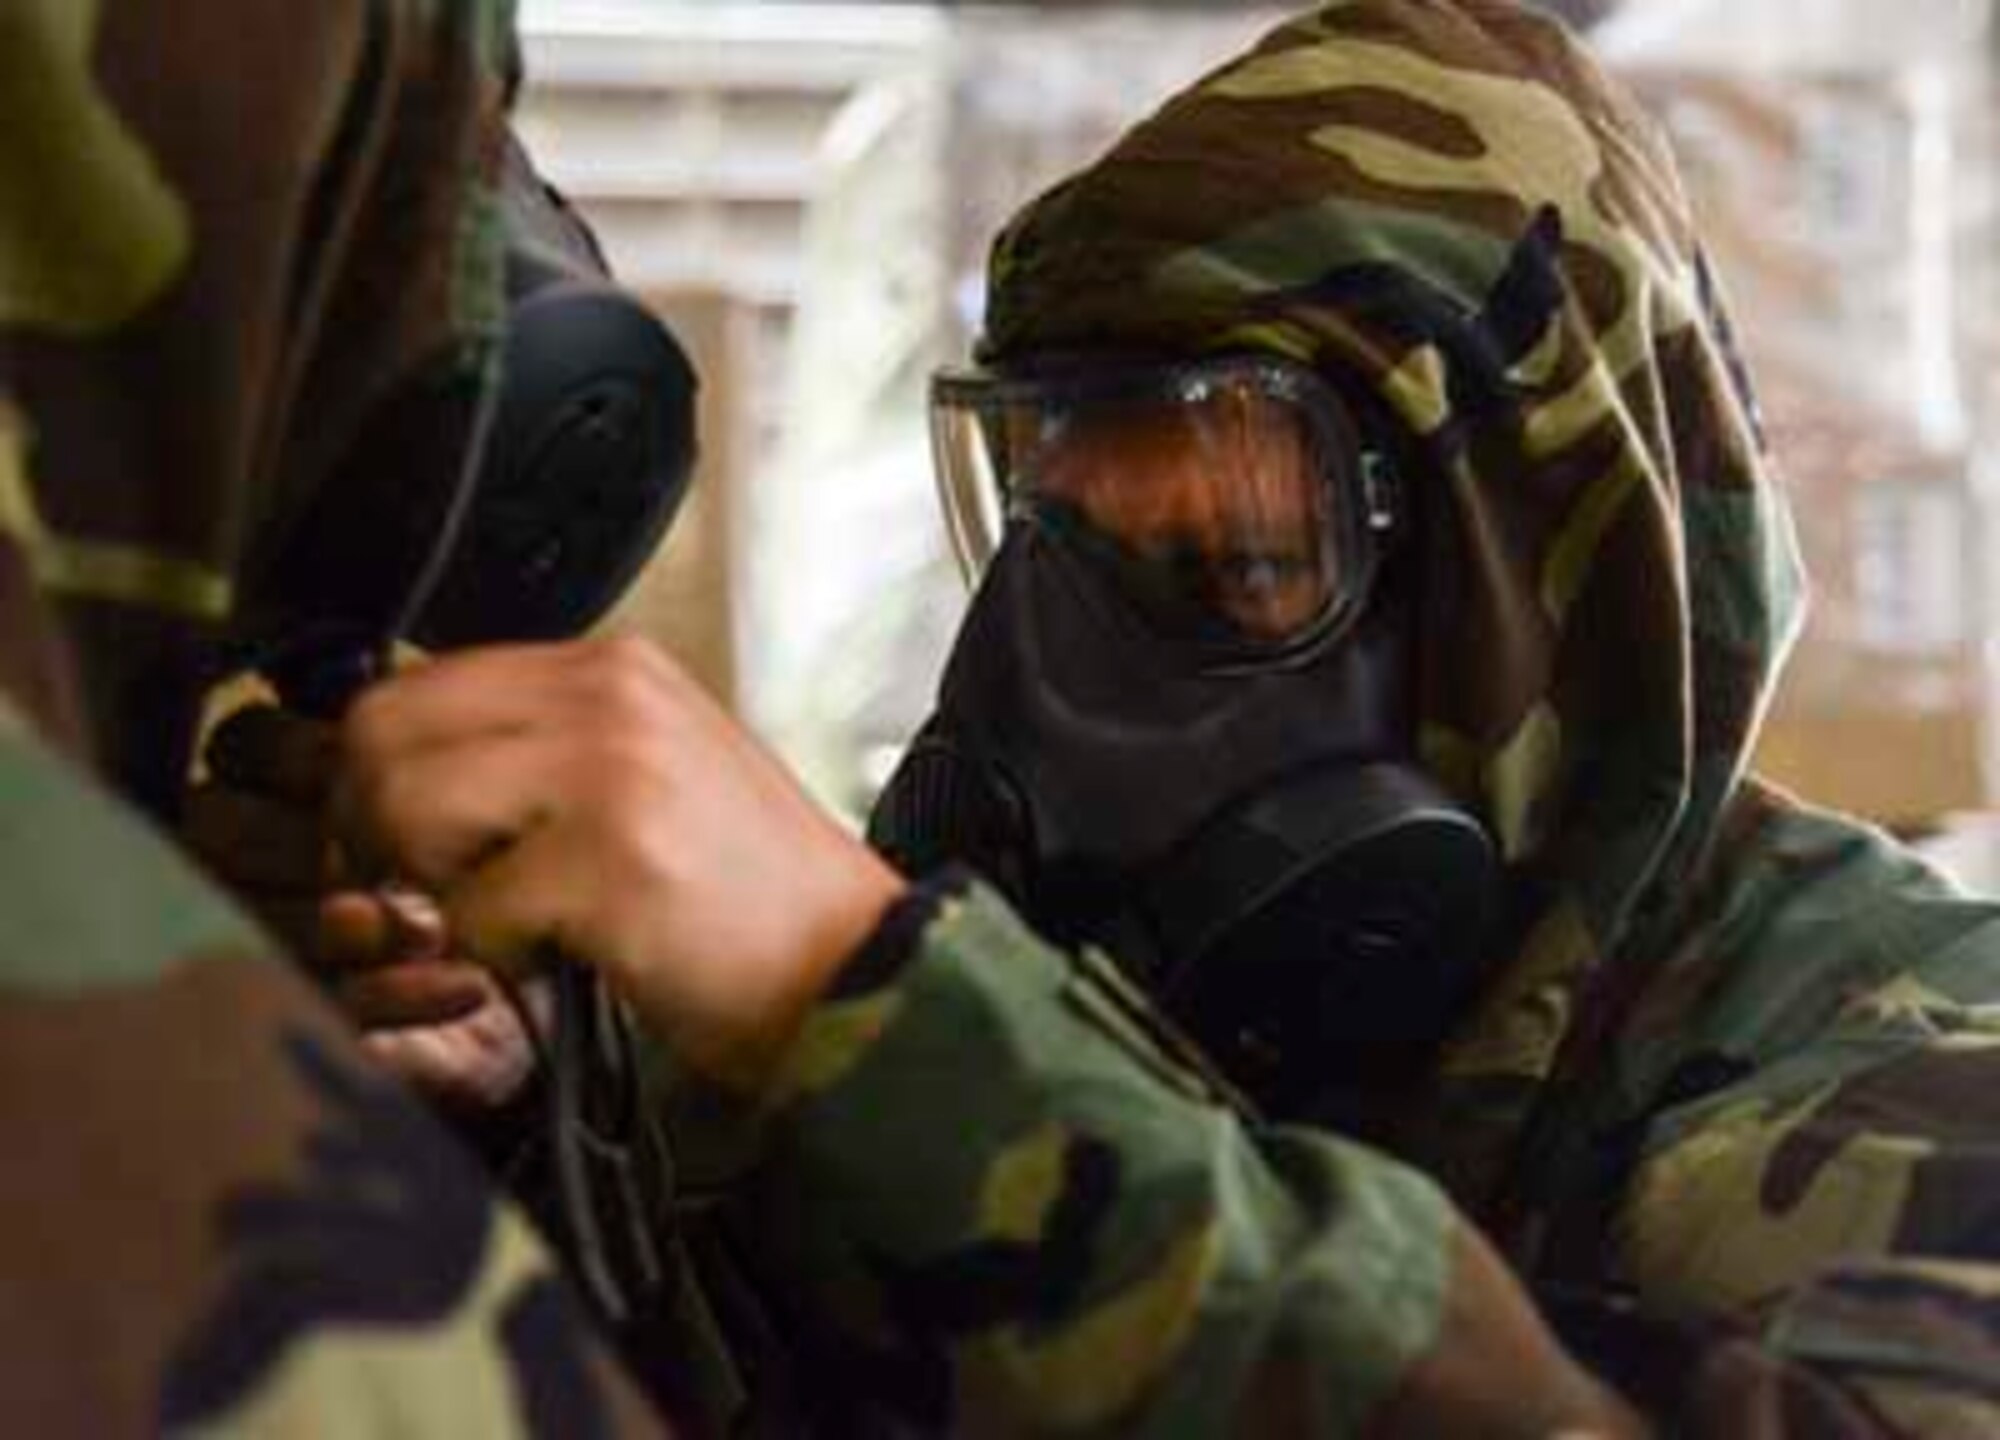 Airmen from the 189th Airlift Wing assist each other in checking for leaks in the protective mask used during a chemical, biological, radiological or nuclear attack Oct. 6, 2016, at Little Rock Air Force Base. The masks along with charcoal-lined protective clothing, provide a layer of protection against enemy CBRN attacks. (U.S. Air National Guard photo by Tech. Sgt. Jessica Condit)